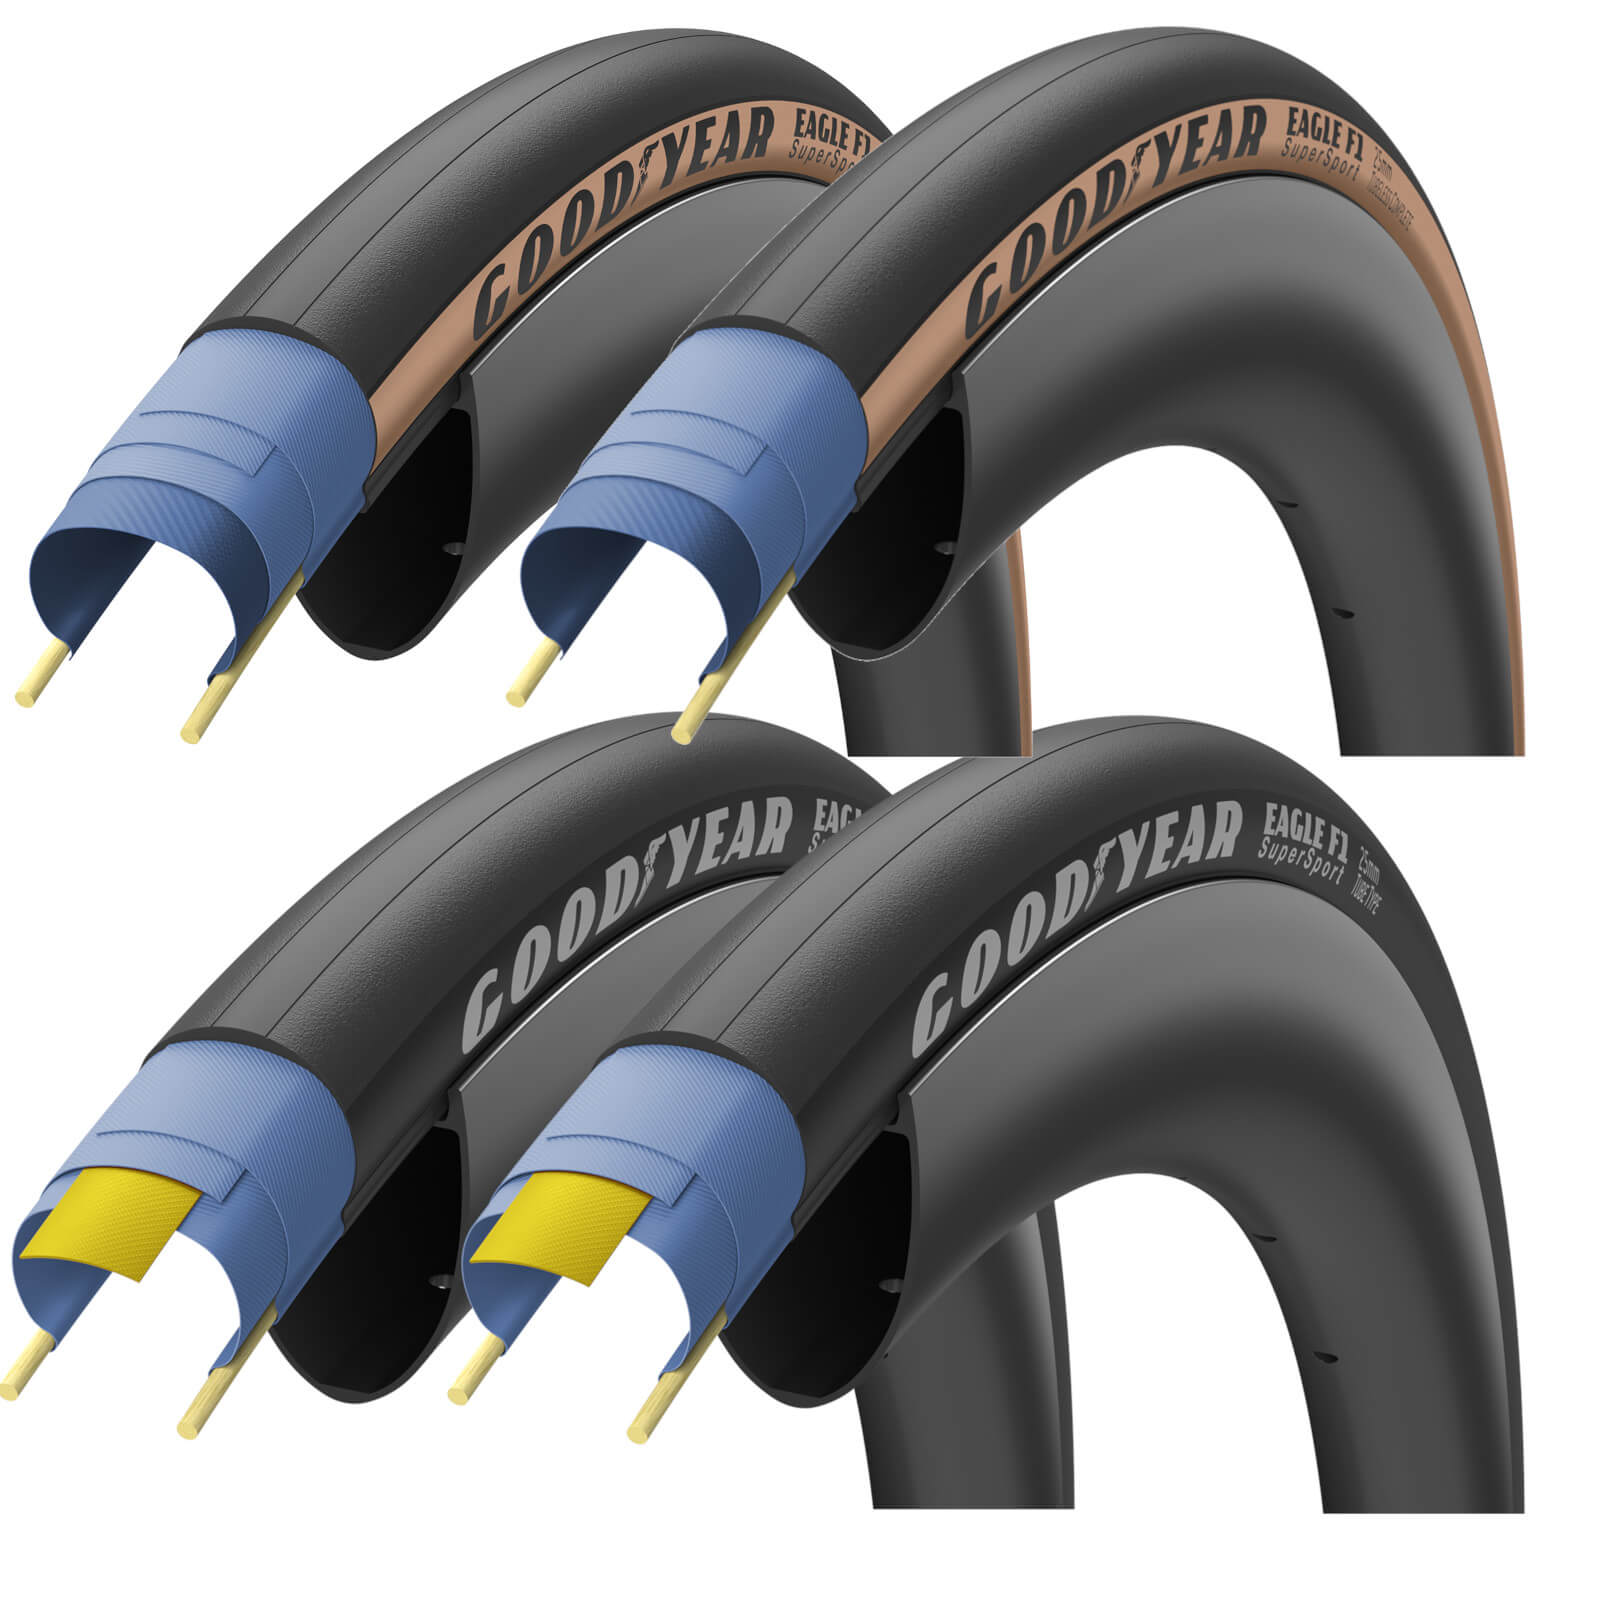 Goodyear Eagle F1 SuperSport Road Tyre Twin Pack - 700C x 28mm - Tan